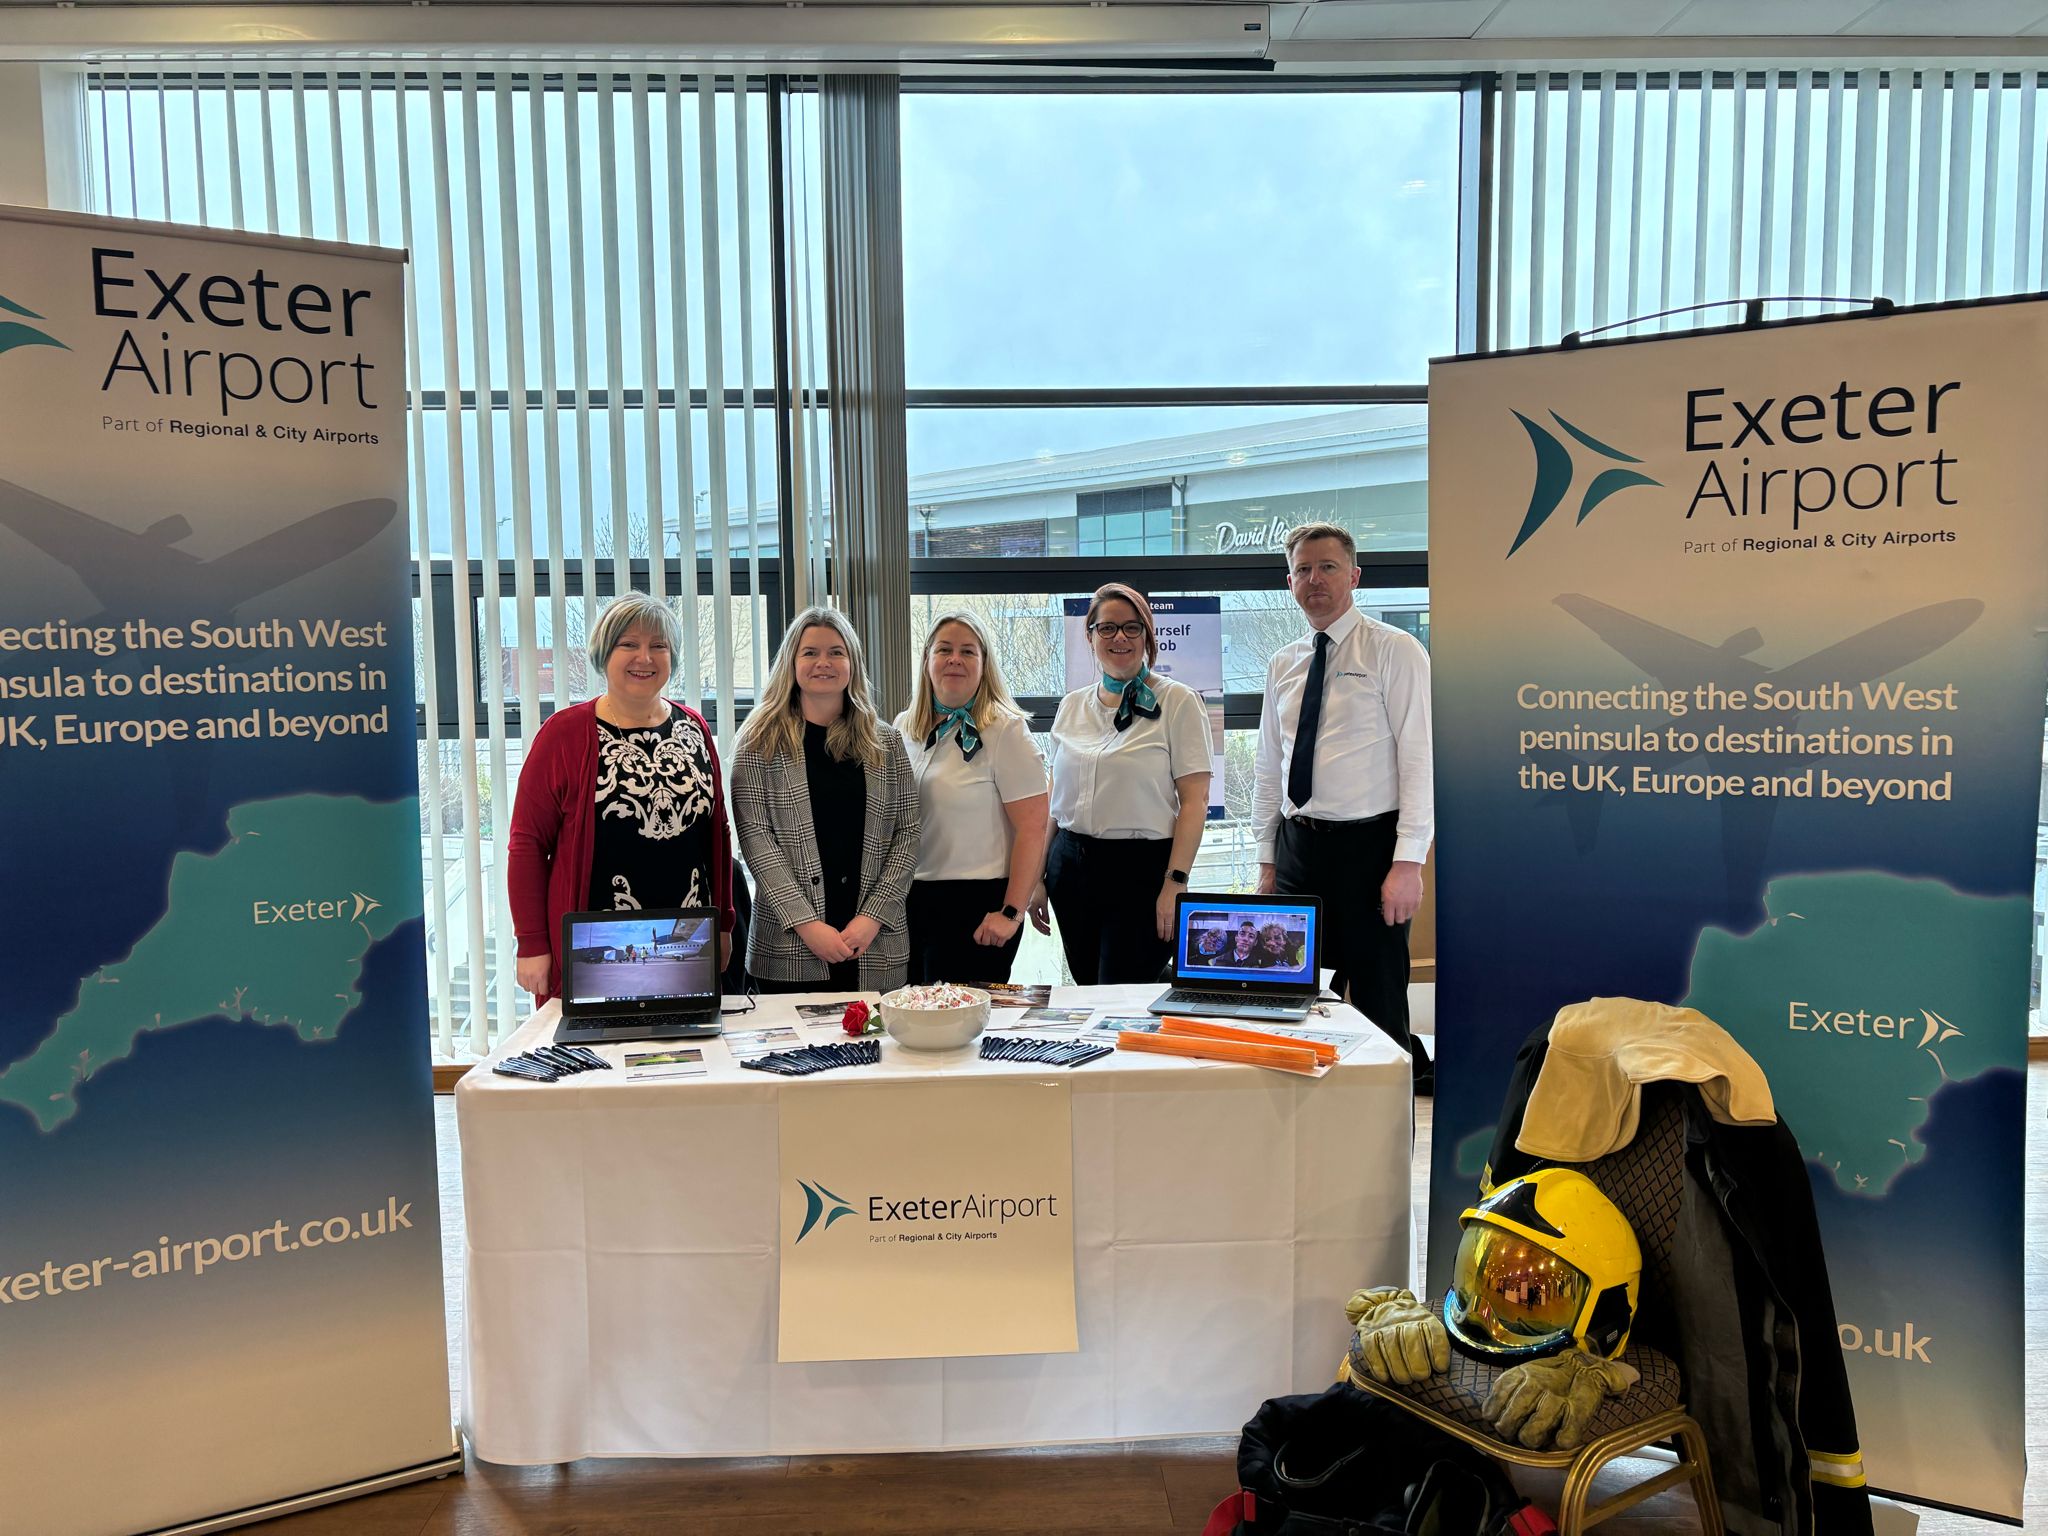 Exeter Airport at our event in Exeter